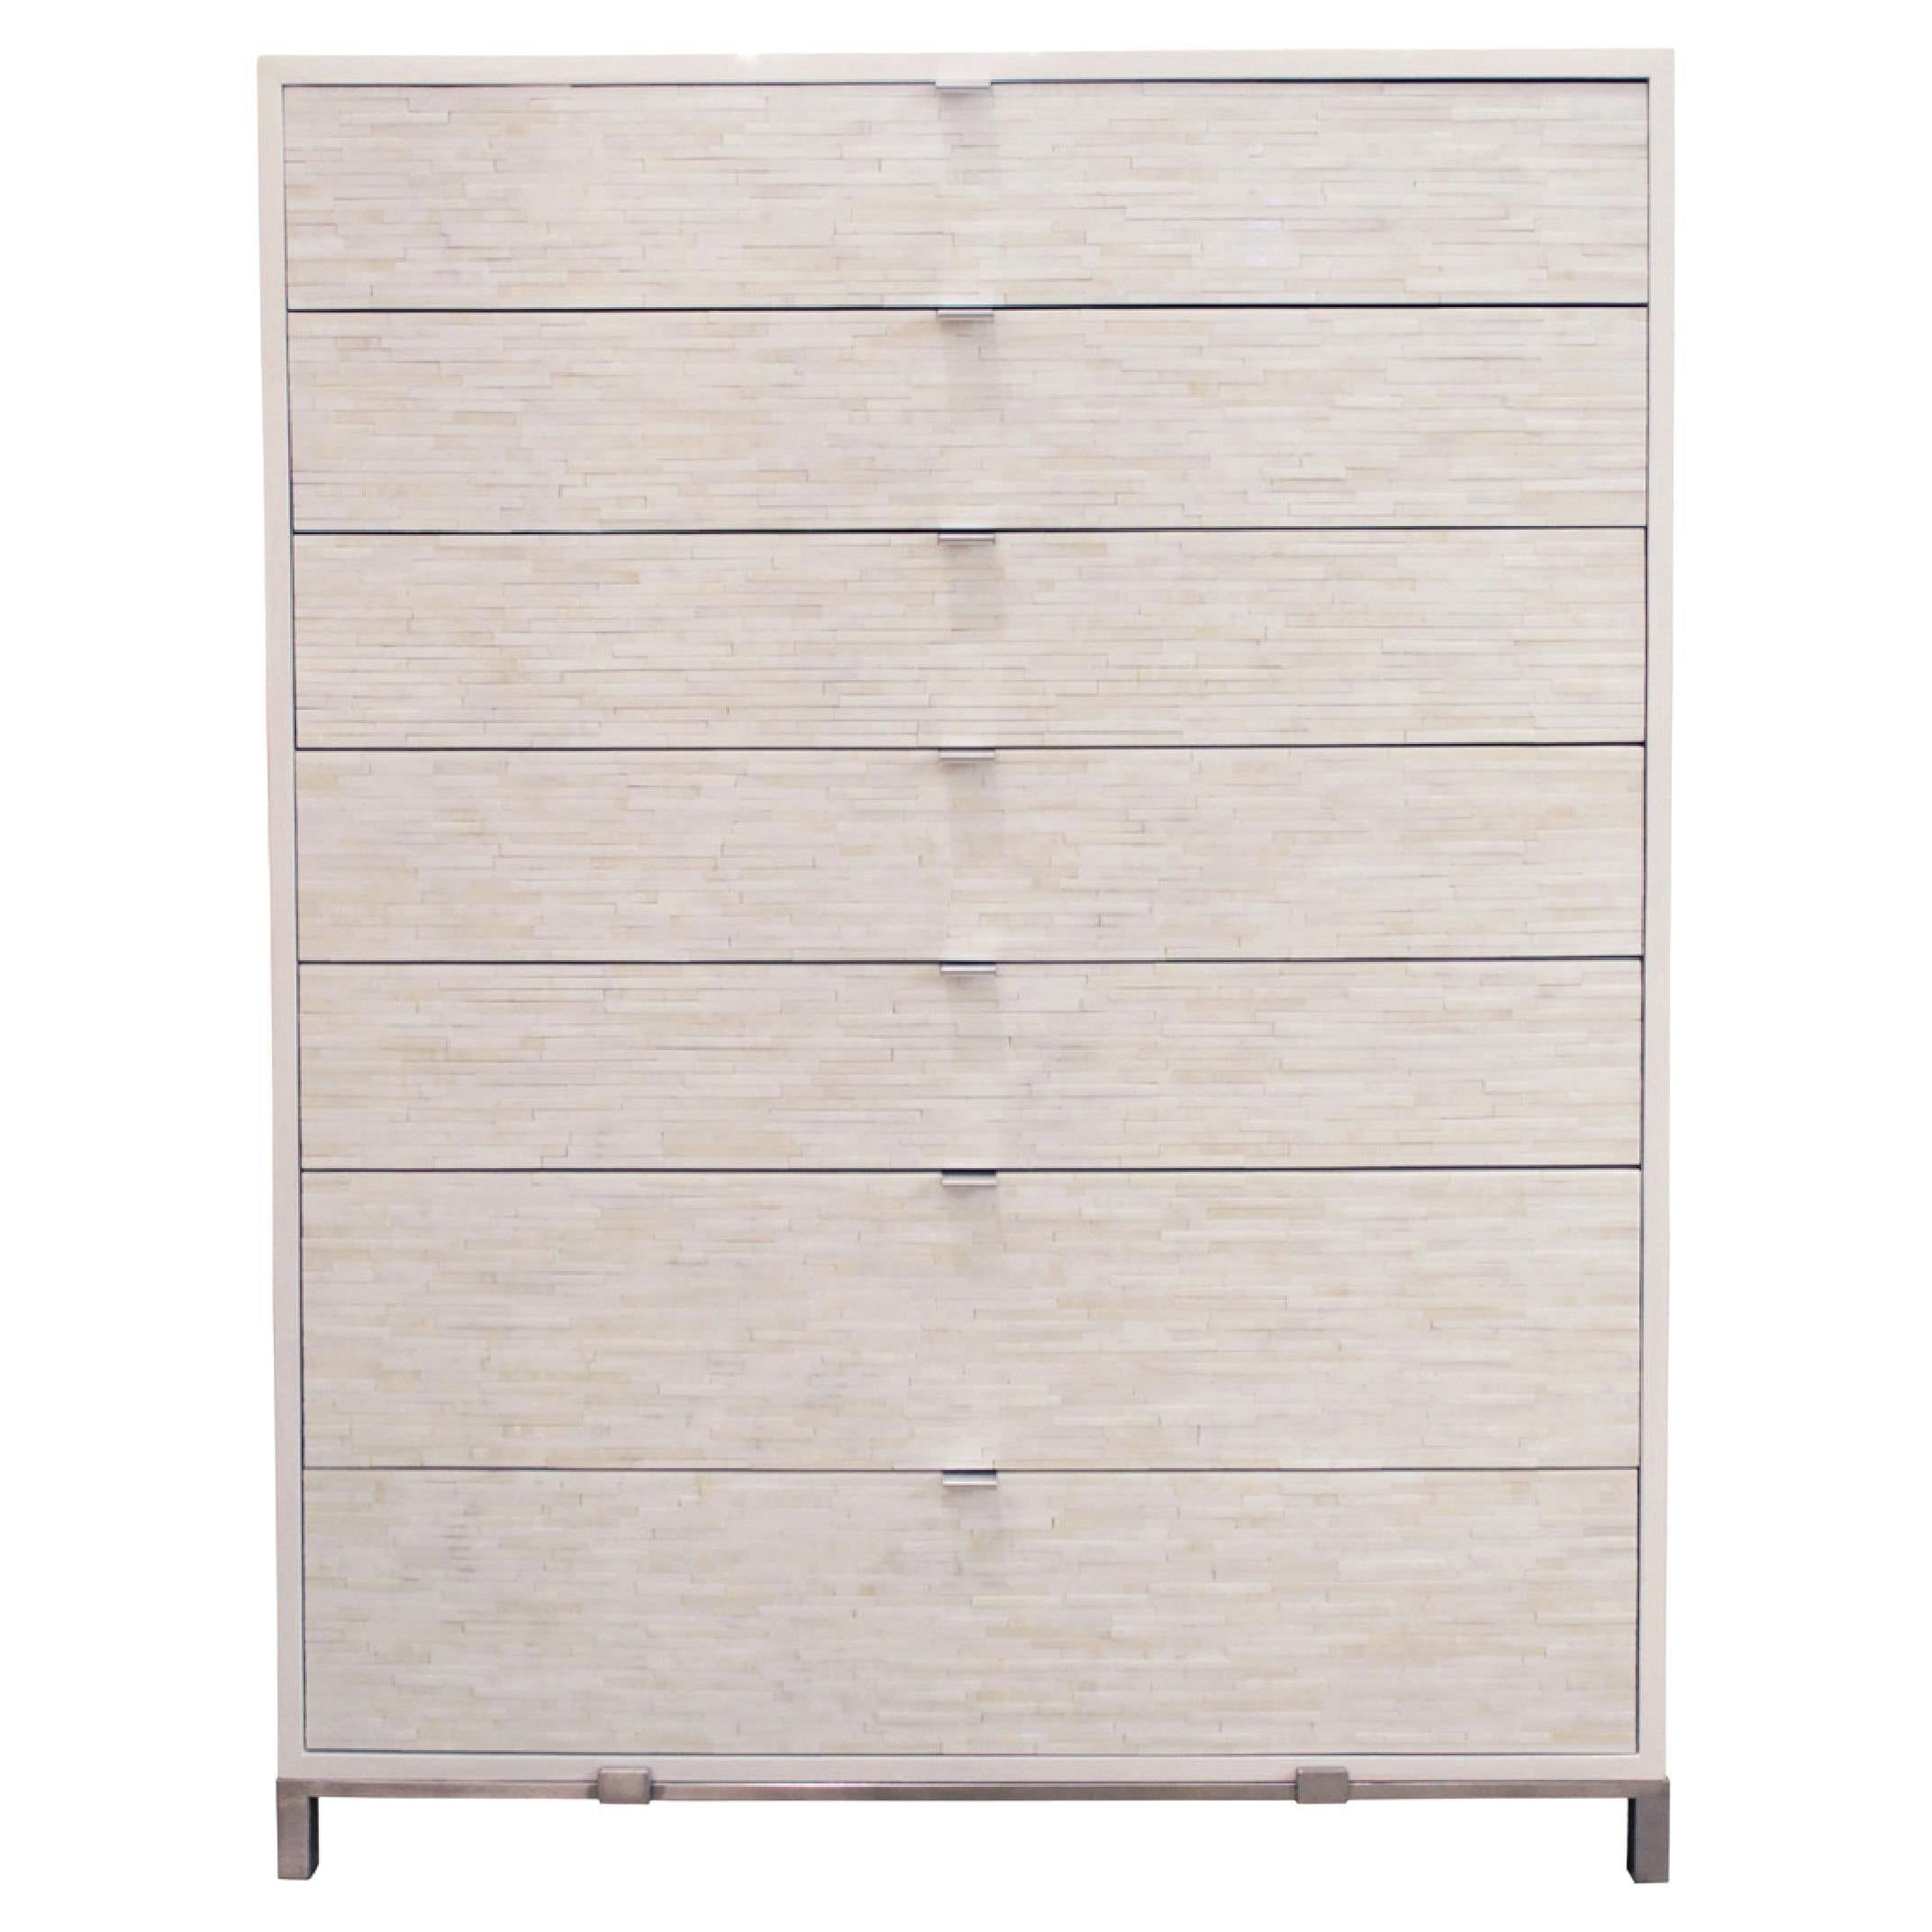 Modern Ivory Glass Mosaic Chest of 7-Drawers with Oak Frame by Ercole Home